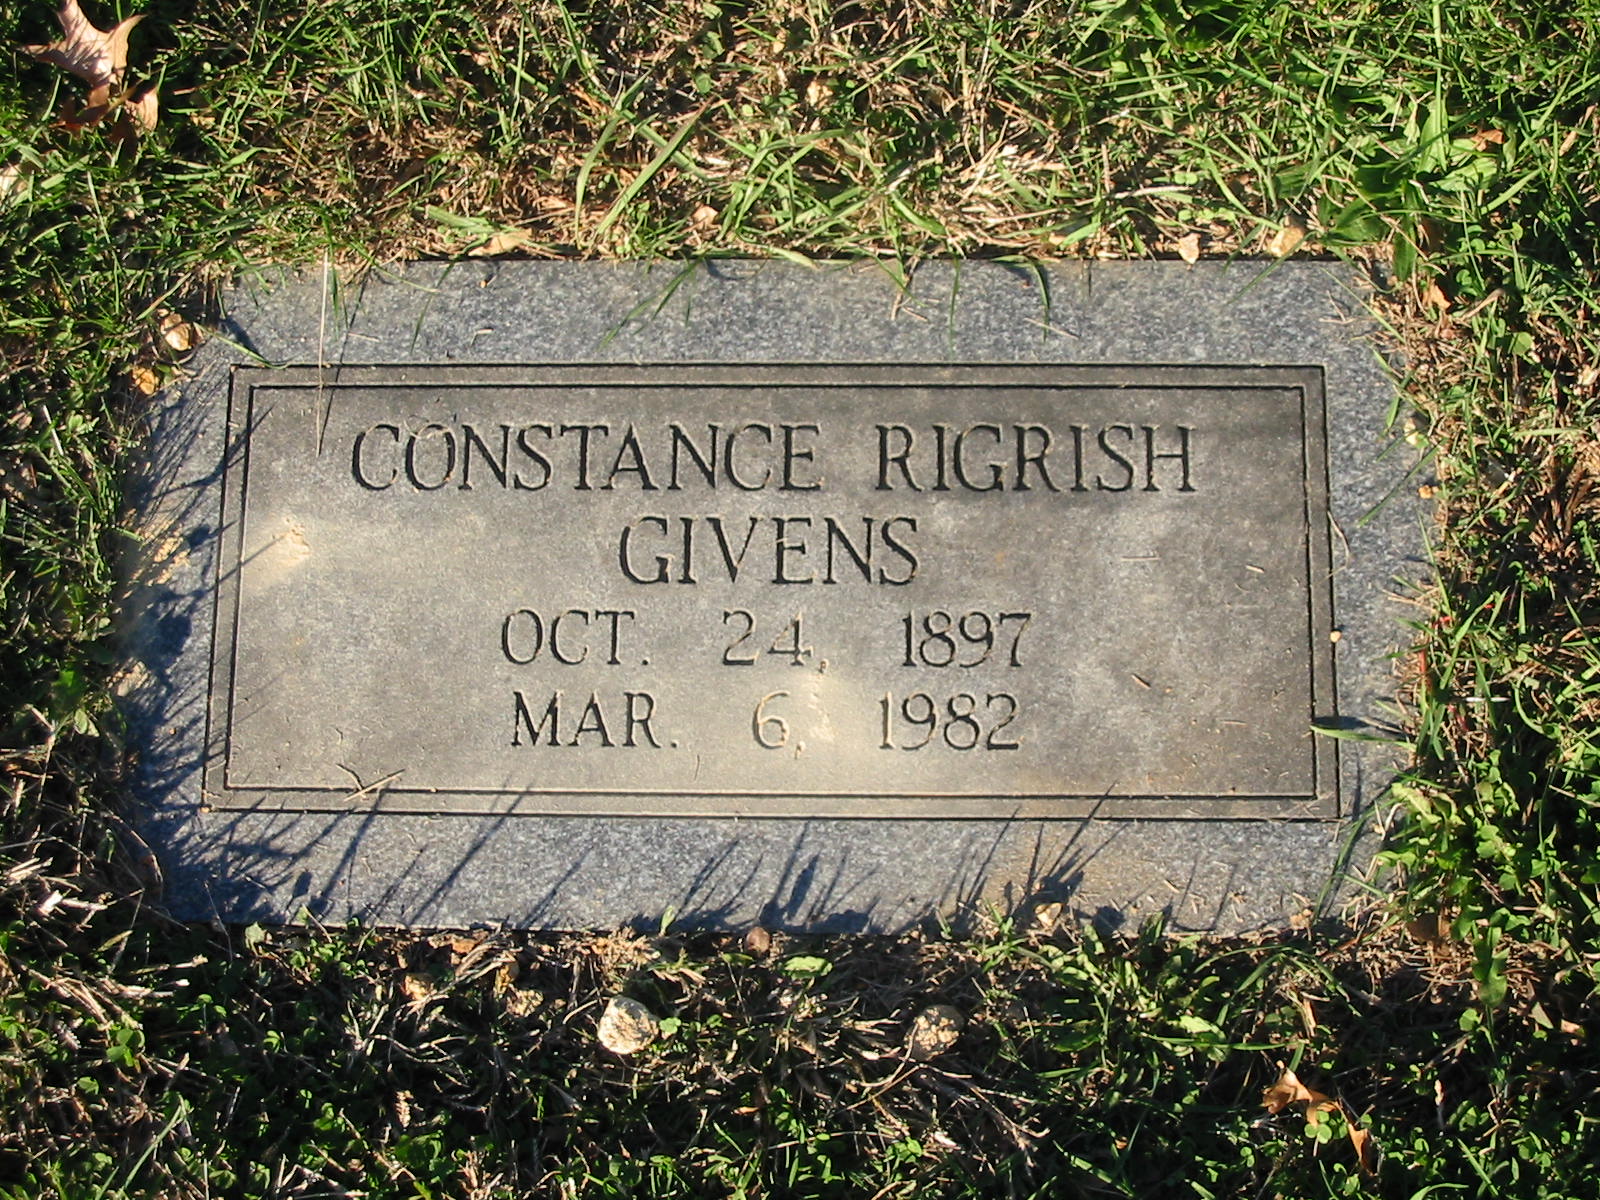 Constance Rigrish Givens (1897-1982)